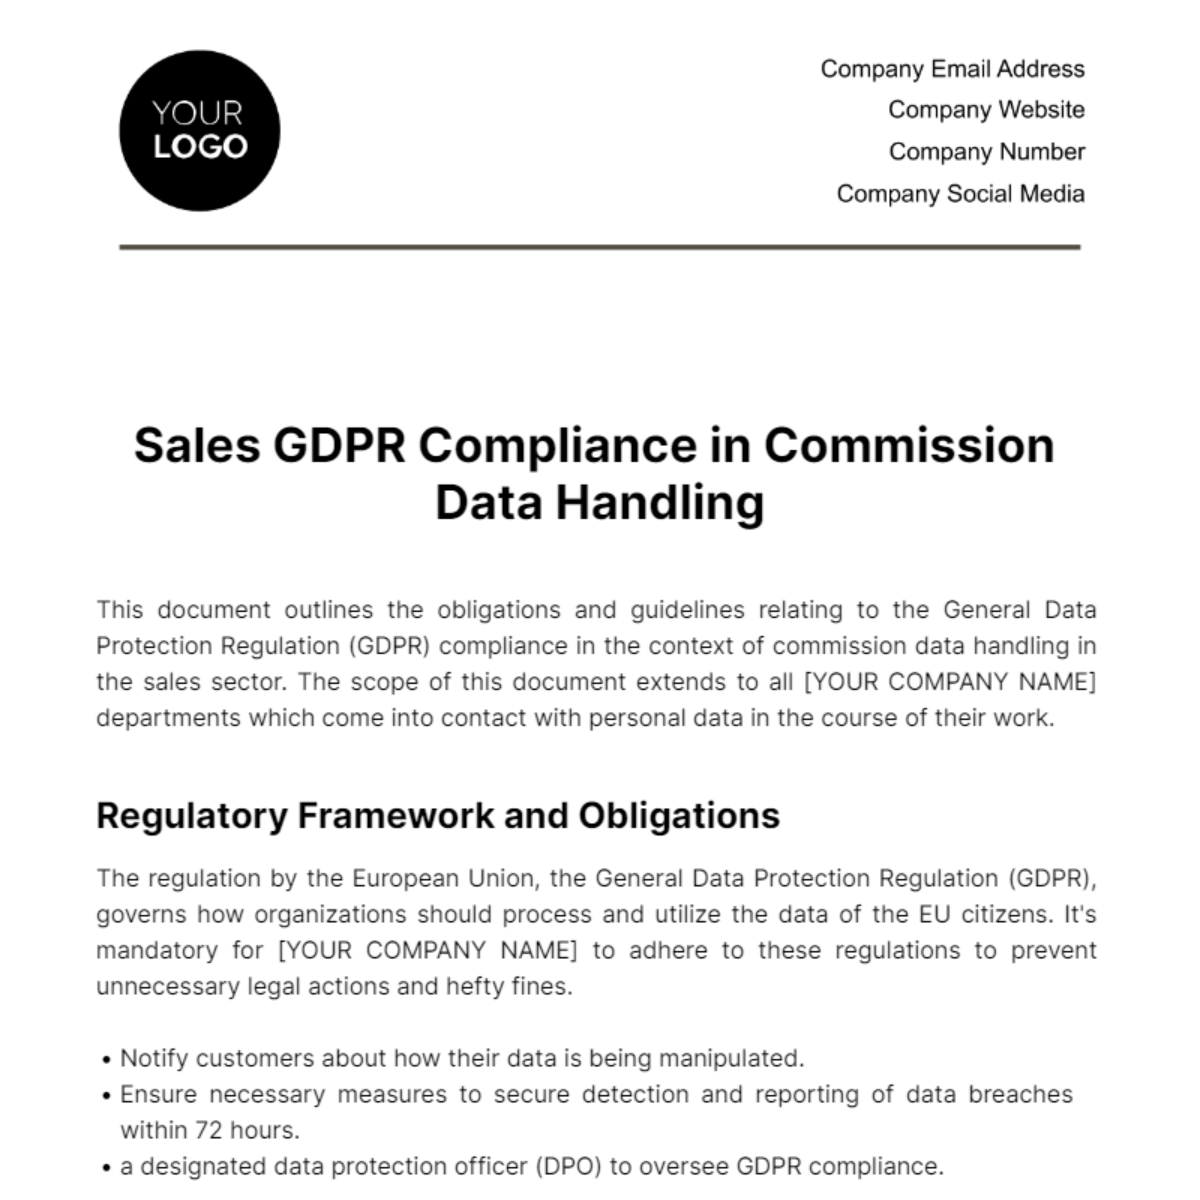 Sales GDPR Compliance in Commission Data Handling Template